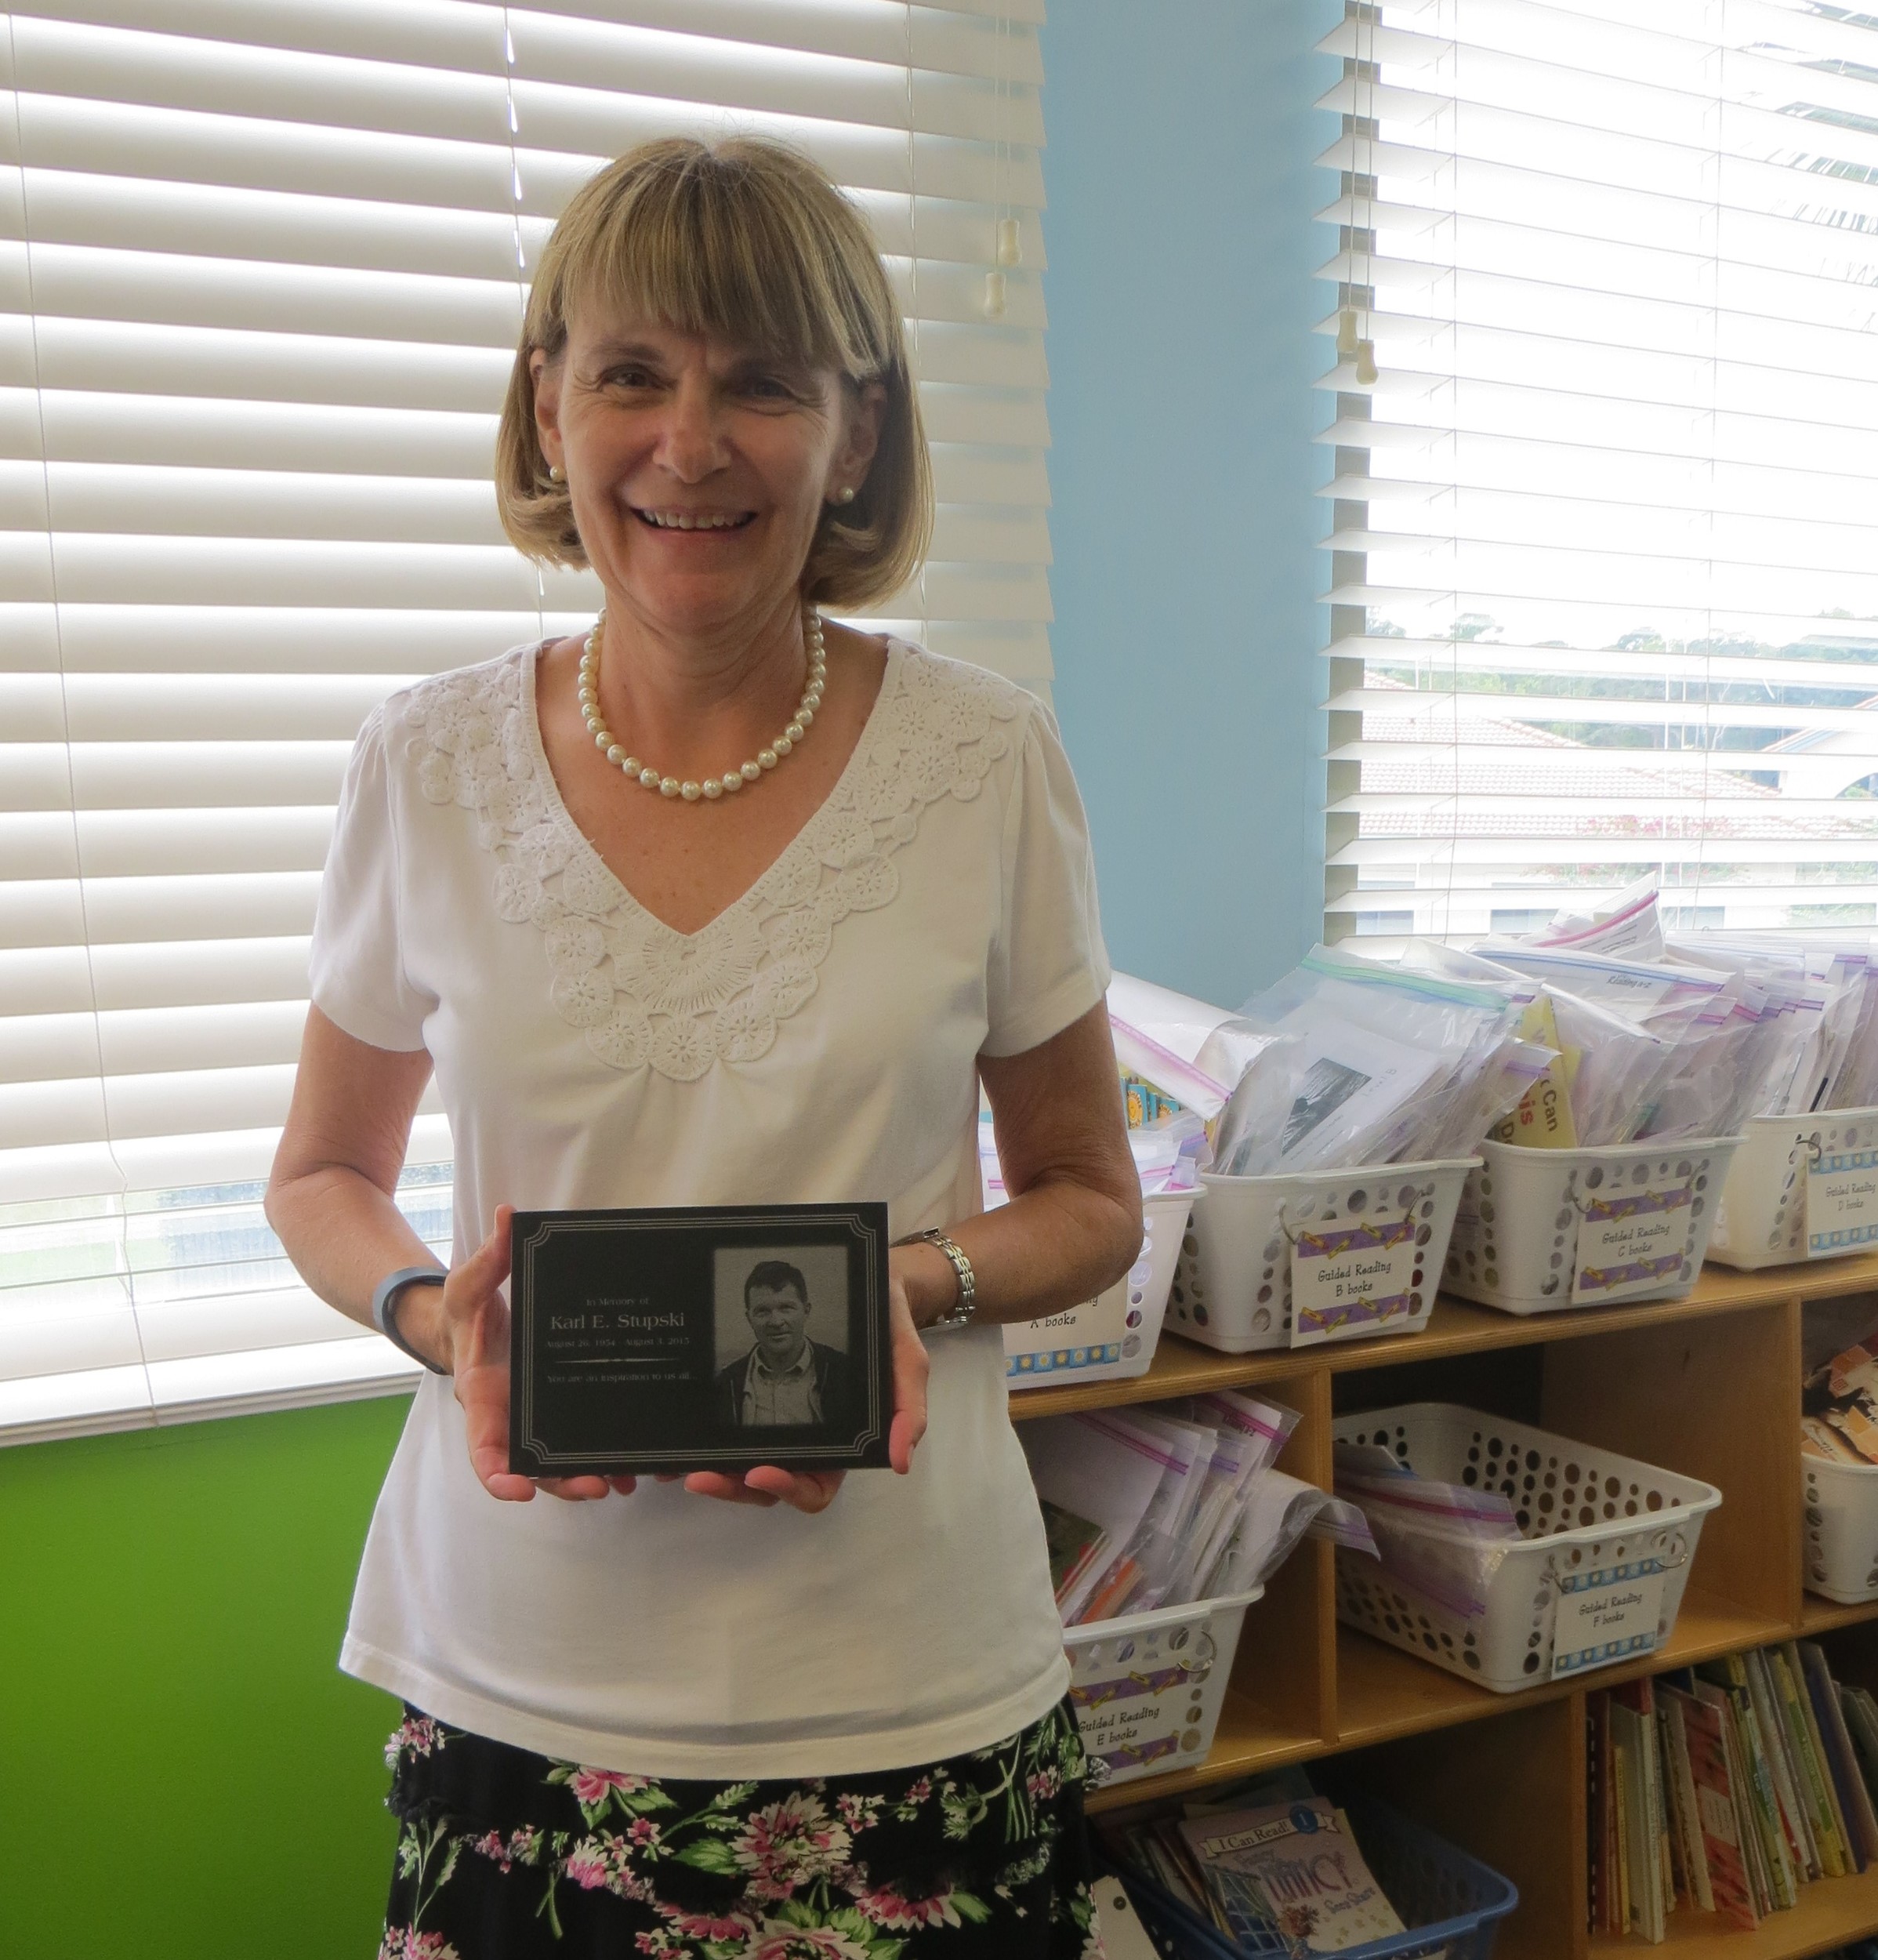 Bolles Lower School Ponte Vedra Kindergarten Teacher Cathy Stupski displays a plaque given to her by her late husband’s employer.